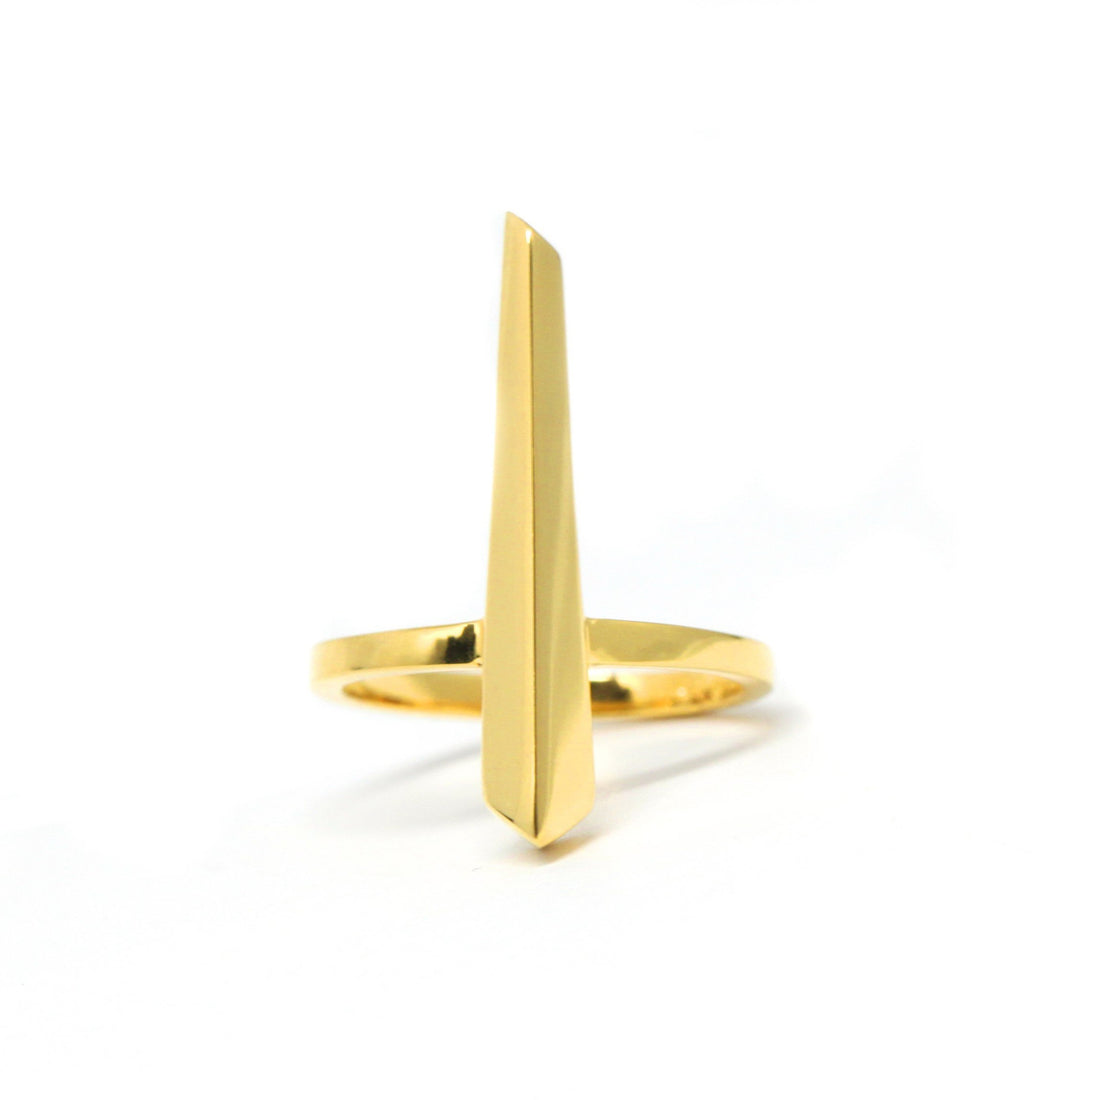 Edgy ring Bena Jewelry Montreal Jewelry Designer Custom Maed Unisexe Minimalist Jewelry Montreal Made in Canada Vermeil Gold ring Silver Gold Plated Custom Made Fine Jewelry